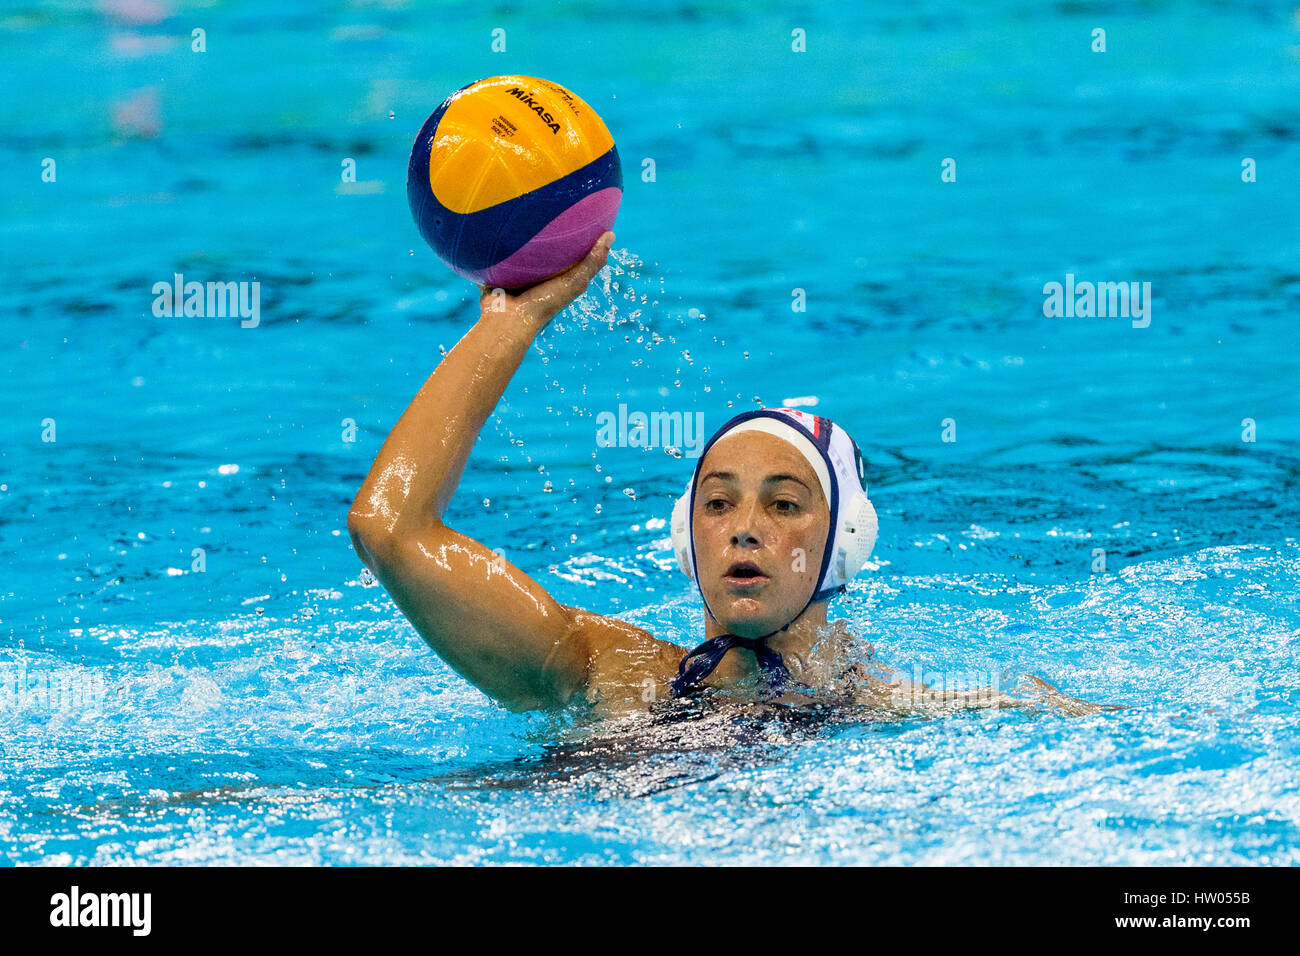 Rio de Janeiro, Brazil. 19 August 2016 Maggie Steffens (USA) competes in the women's water polo gold medal match vs. Italy at the 2016 Olympic Summer Stock Photo